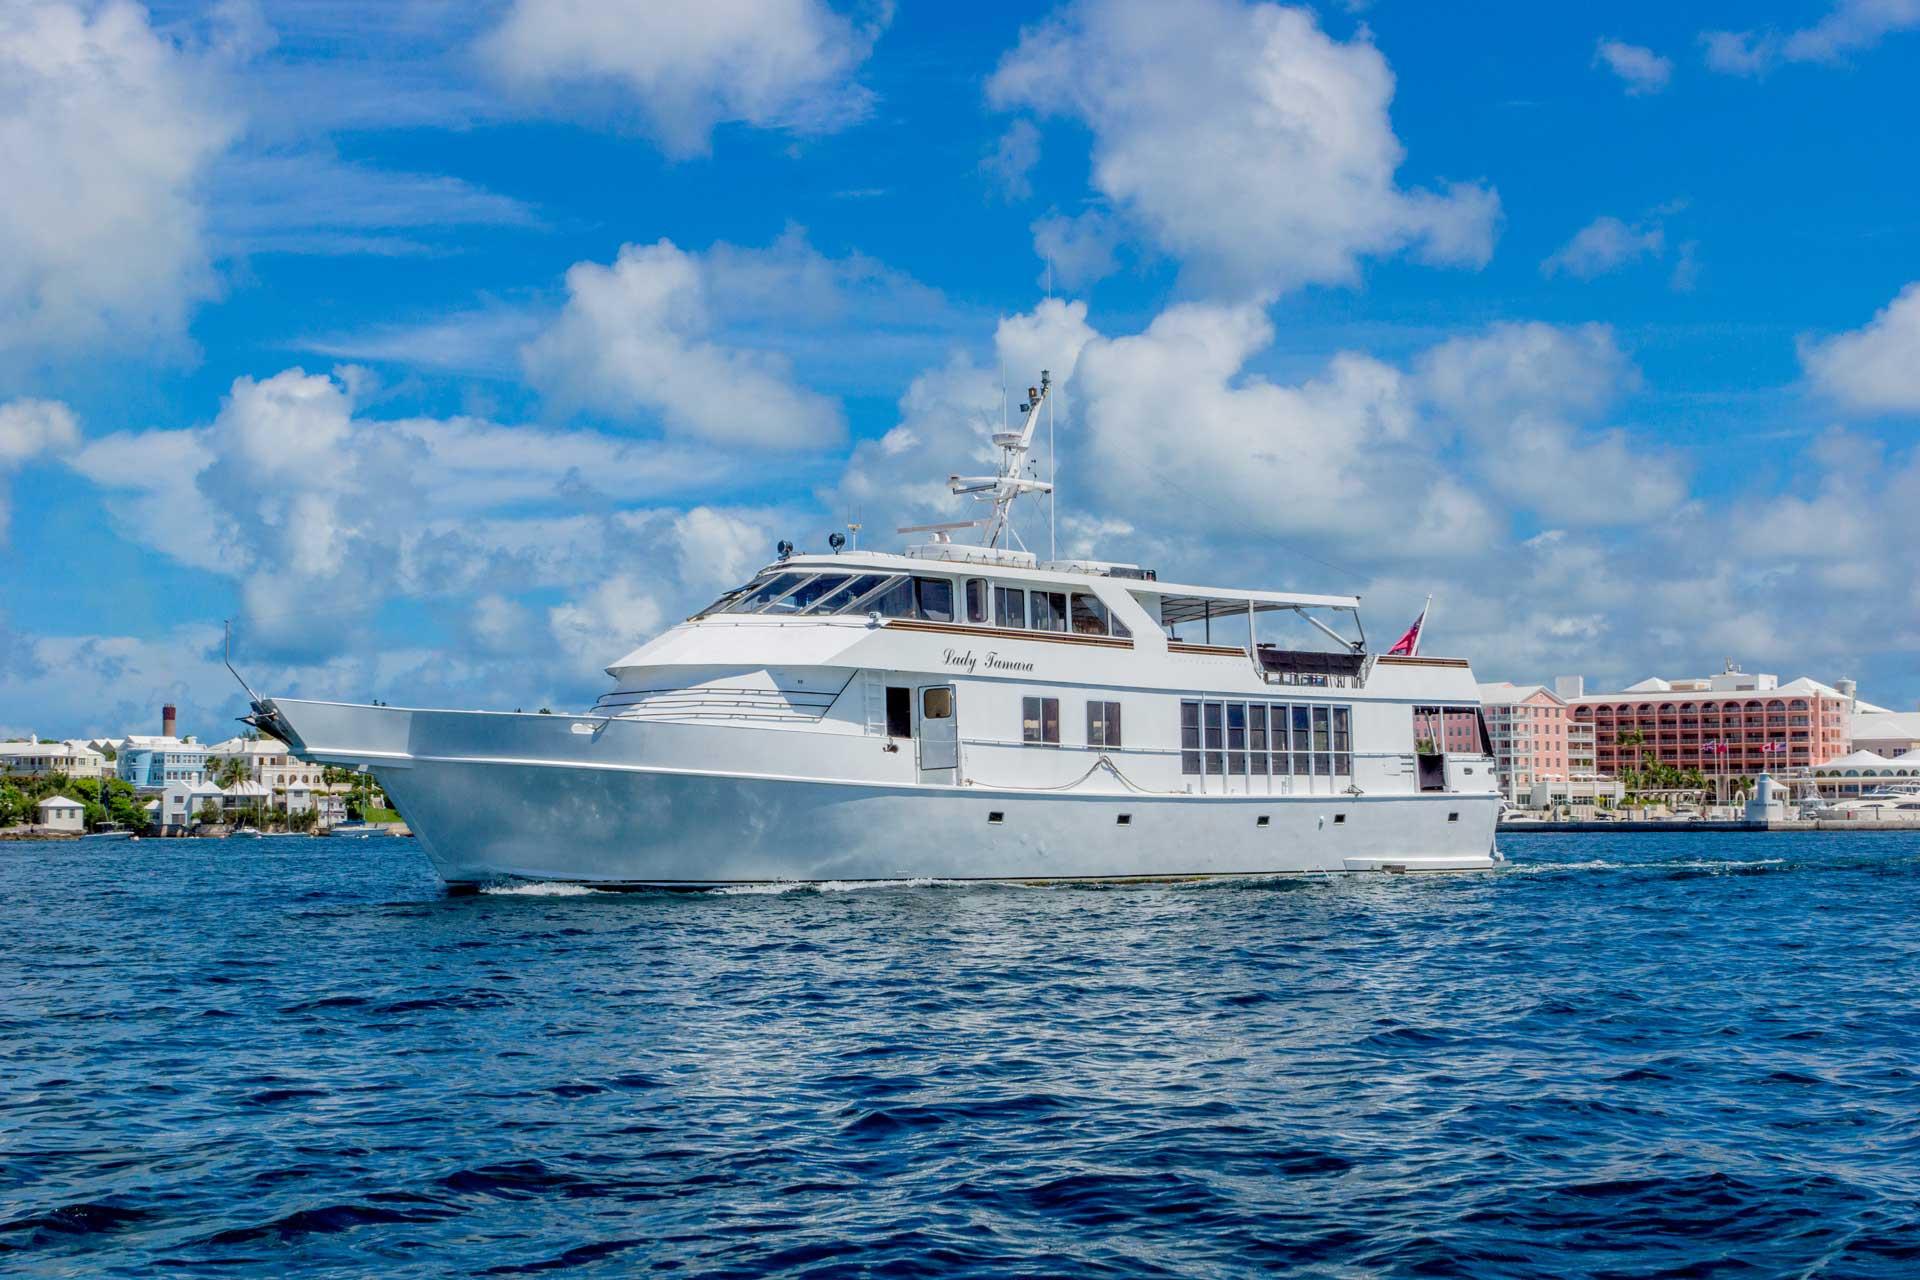 yacht for sale 110 swiftships yachts paget, bermuda denison yacht sales